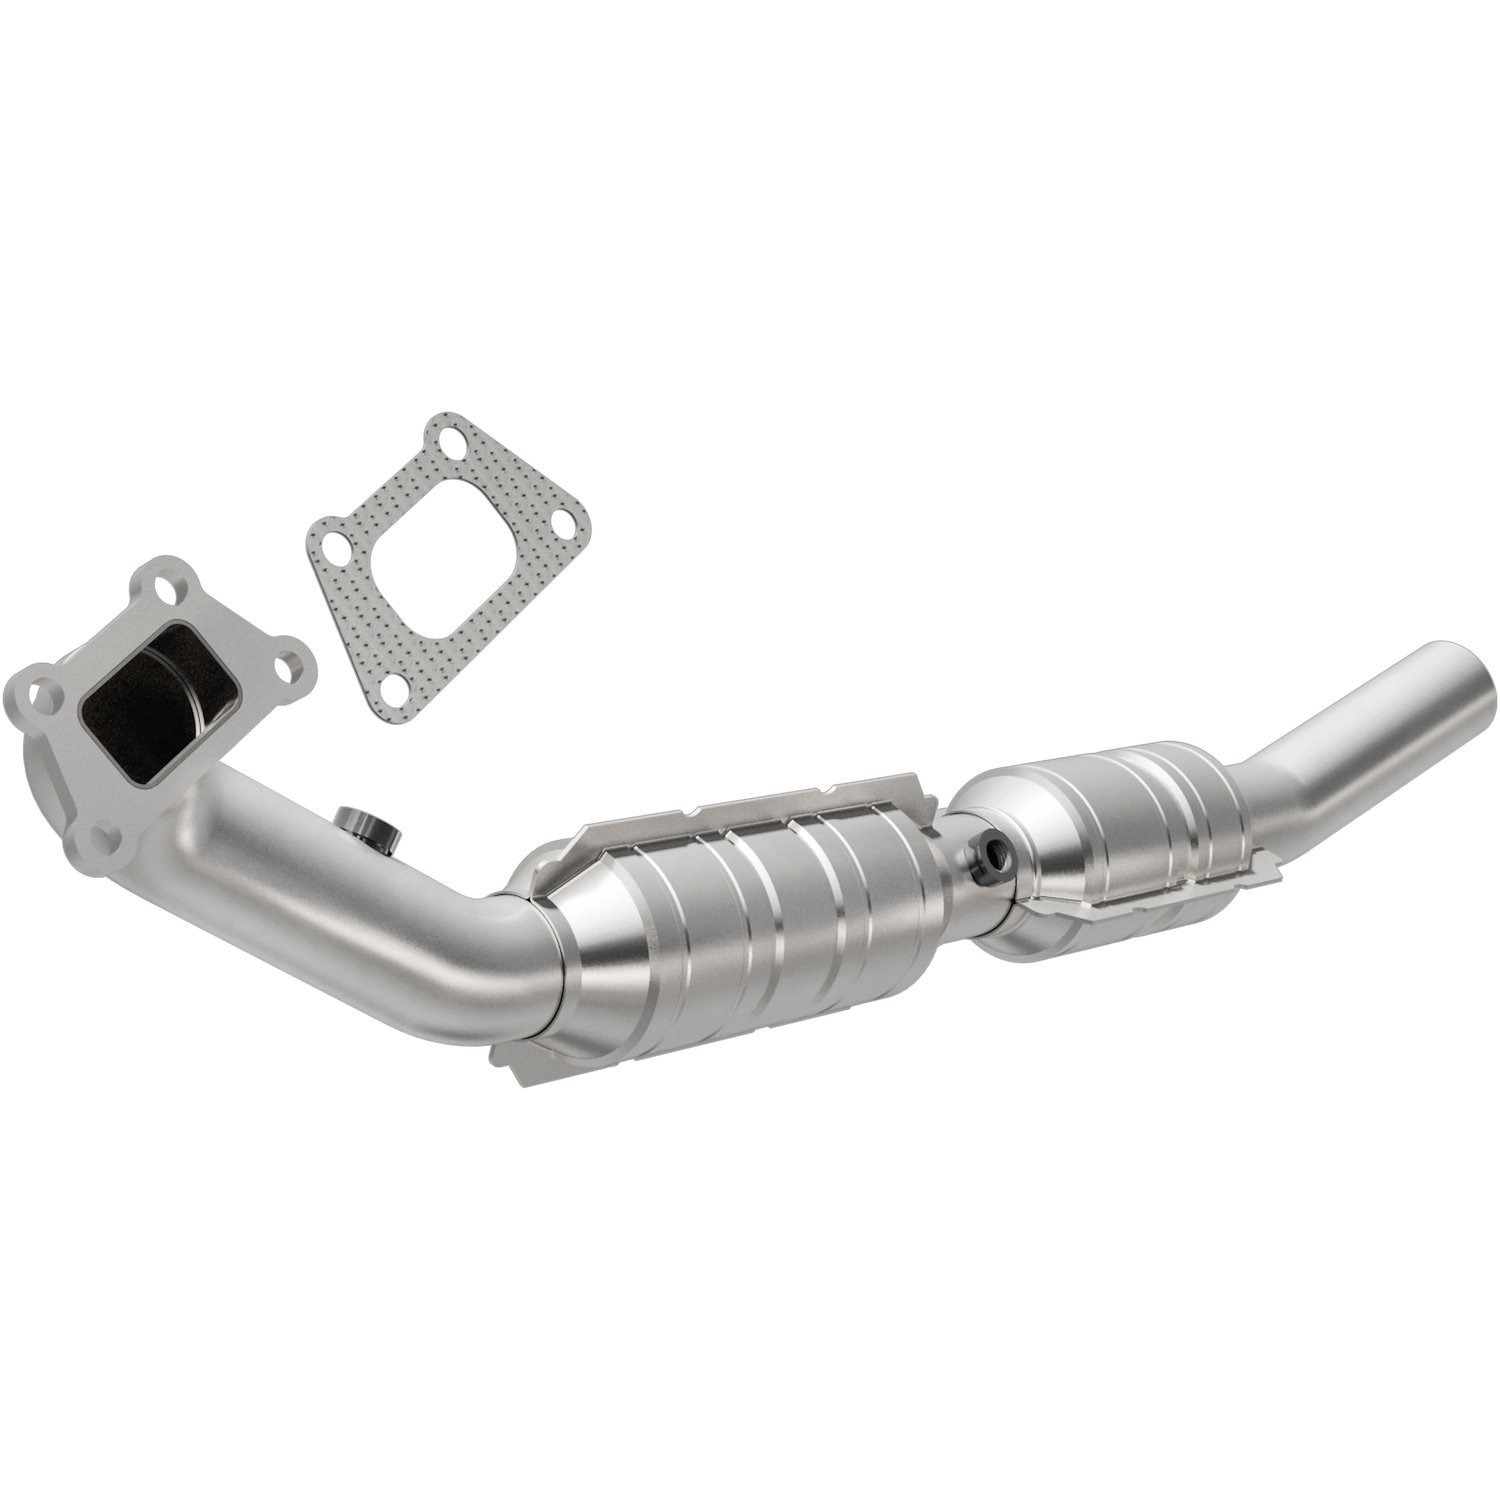 Direct-Fit Catalytic Converter 2012-2015 Chevy Camaro 3.6L V6